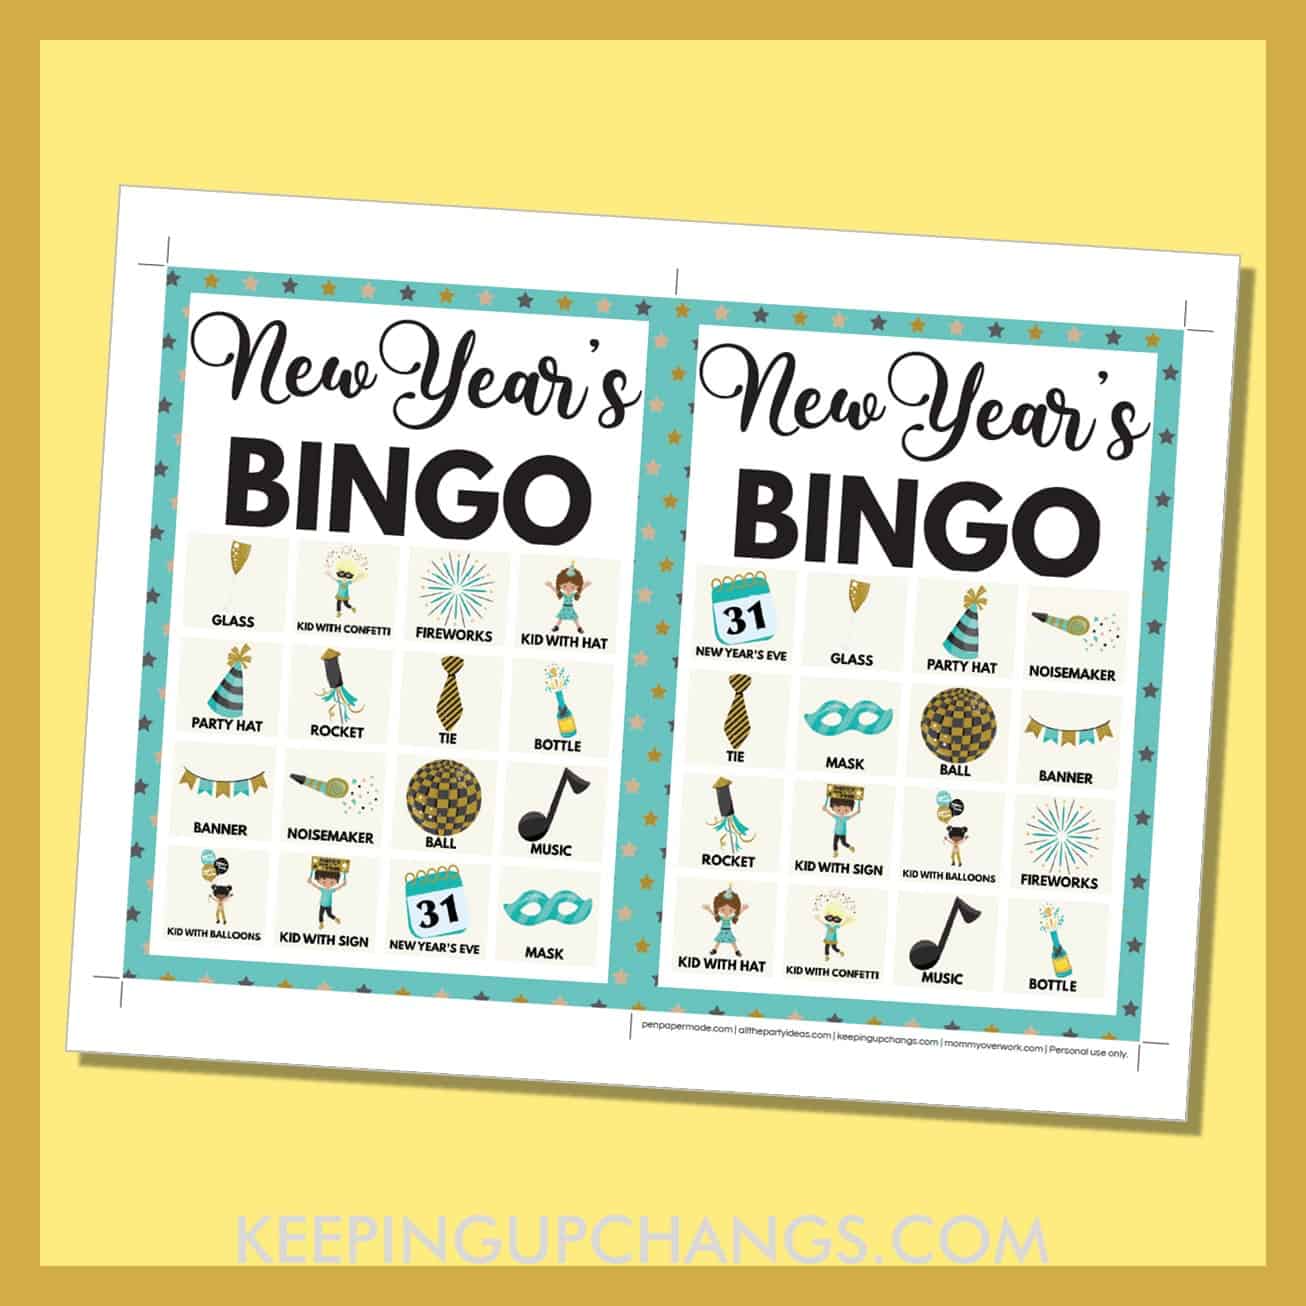 free new year's bingo card 4x4 5x7 game boards with images and text words.